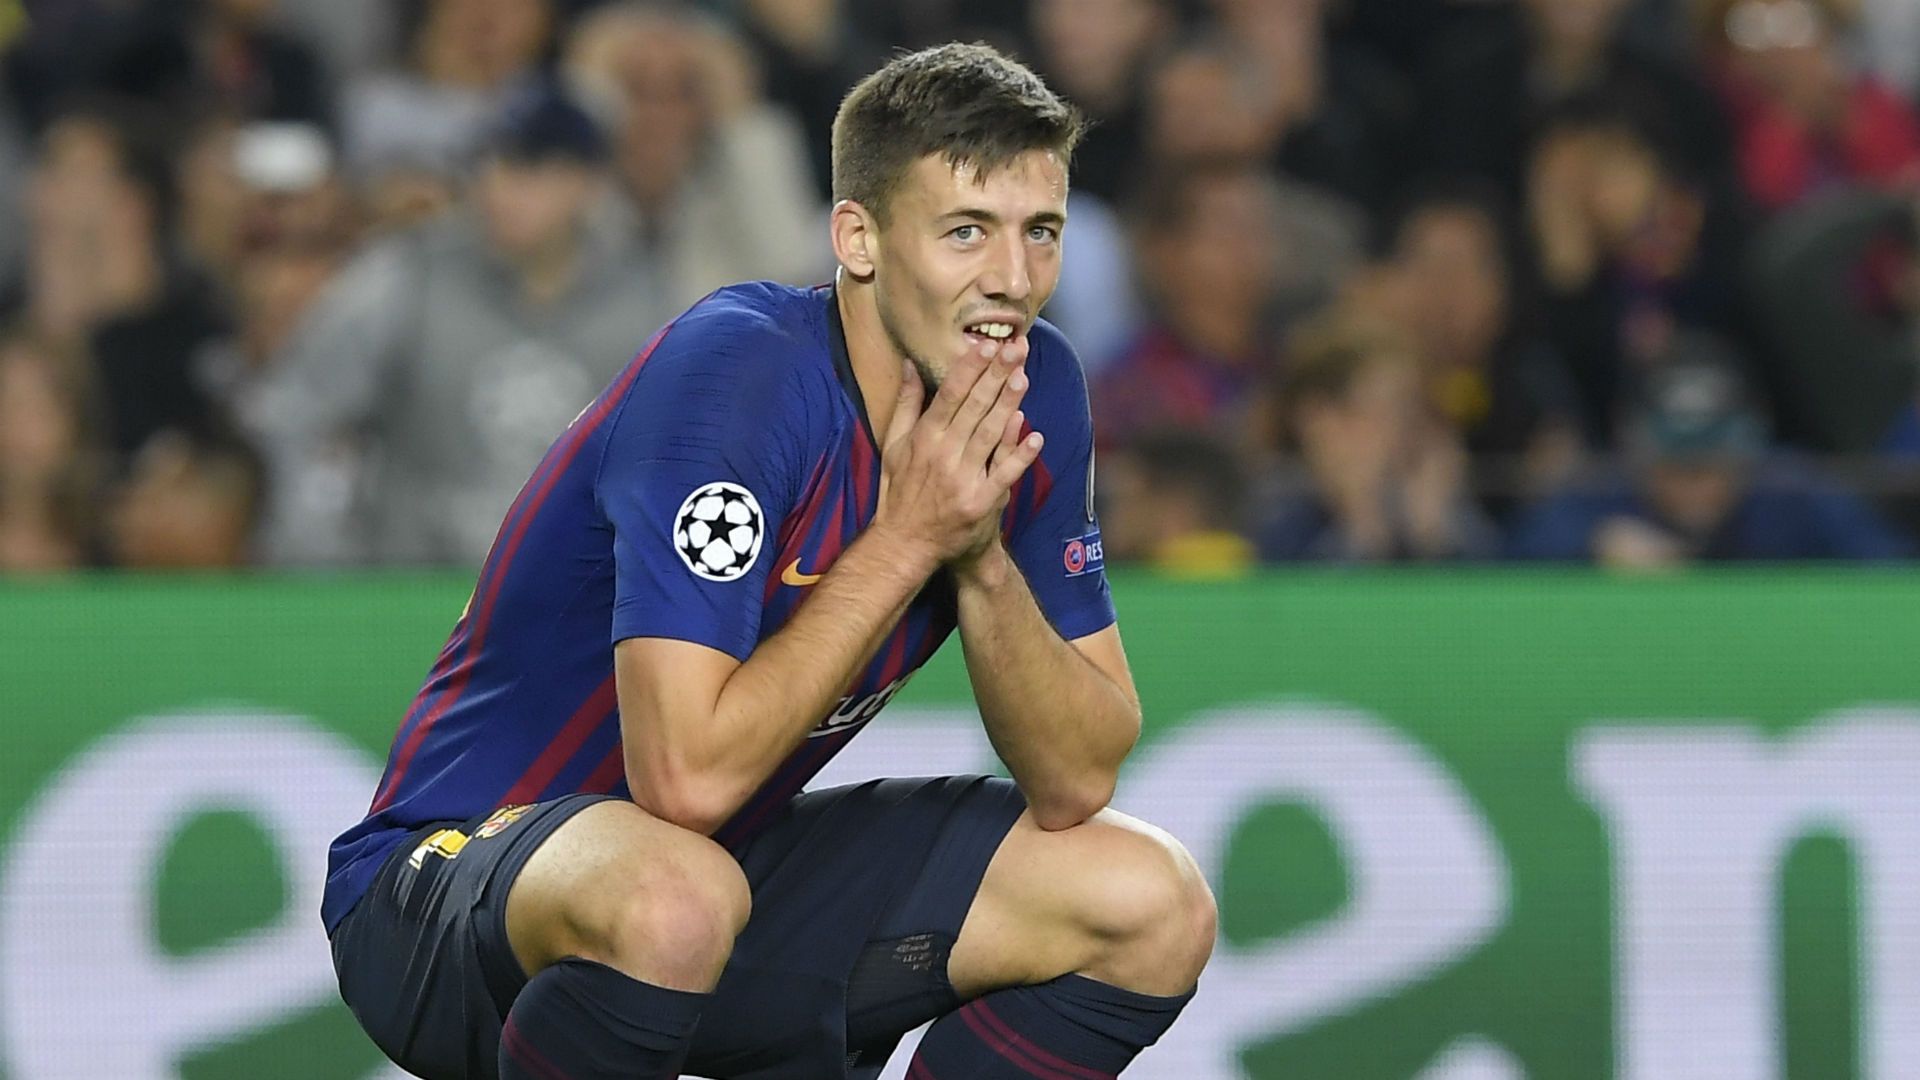 Barcelona news: Clement Lenglet hopes first goal will come in the Clasico against Real Madrid